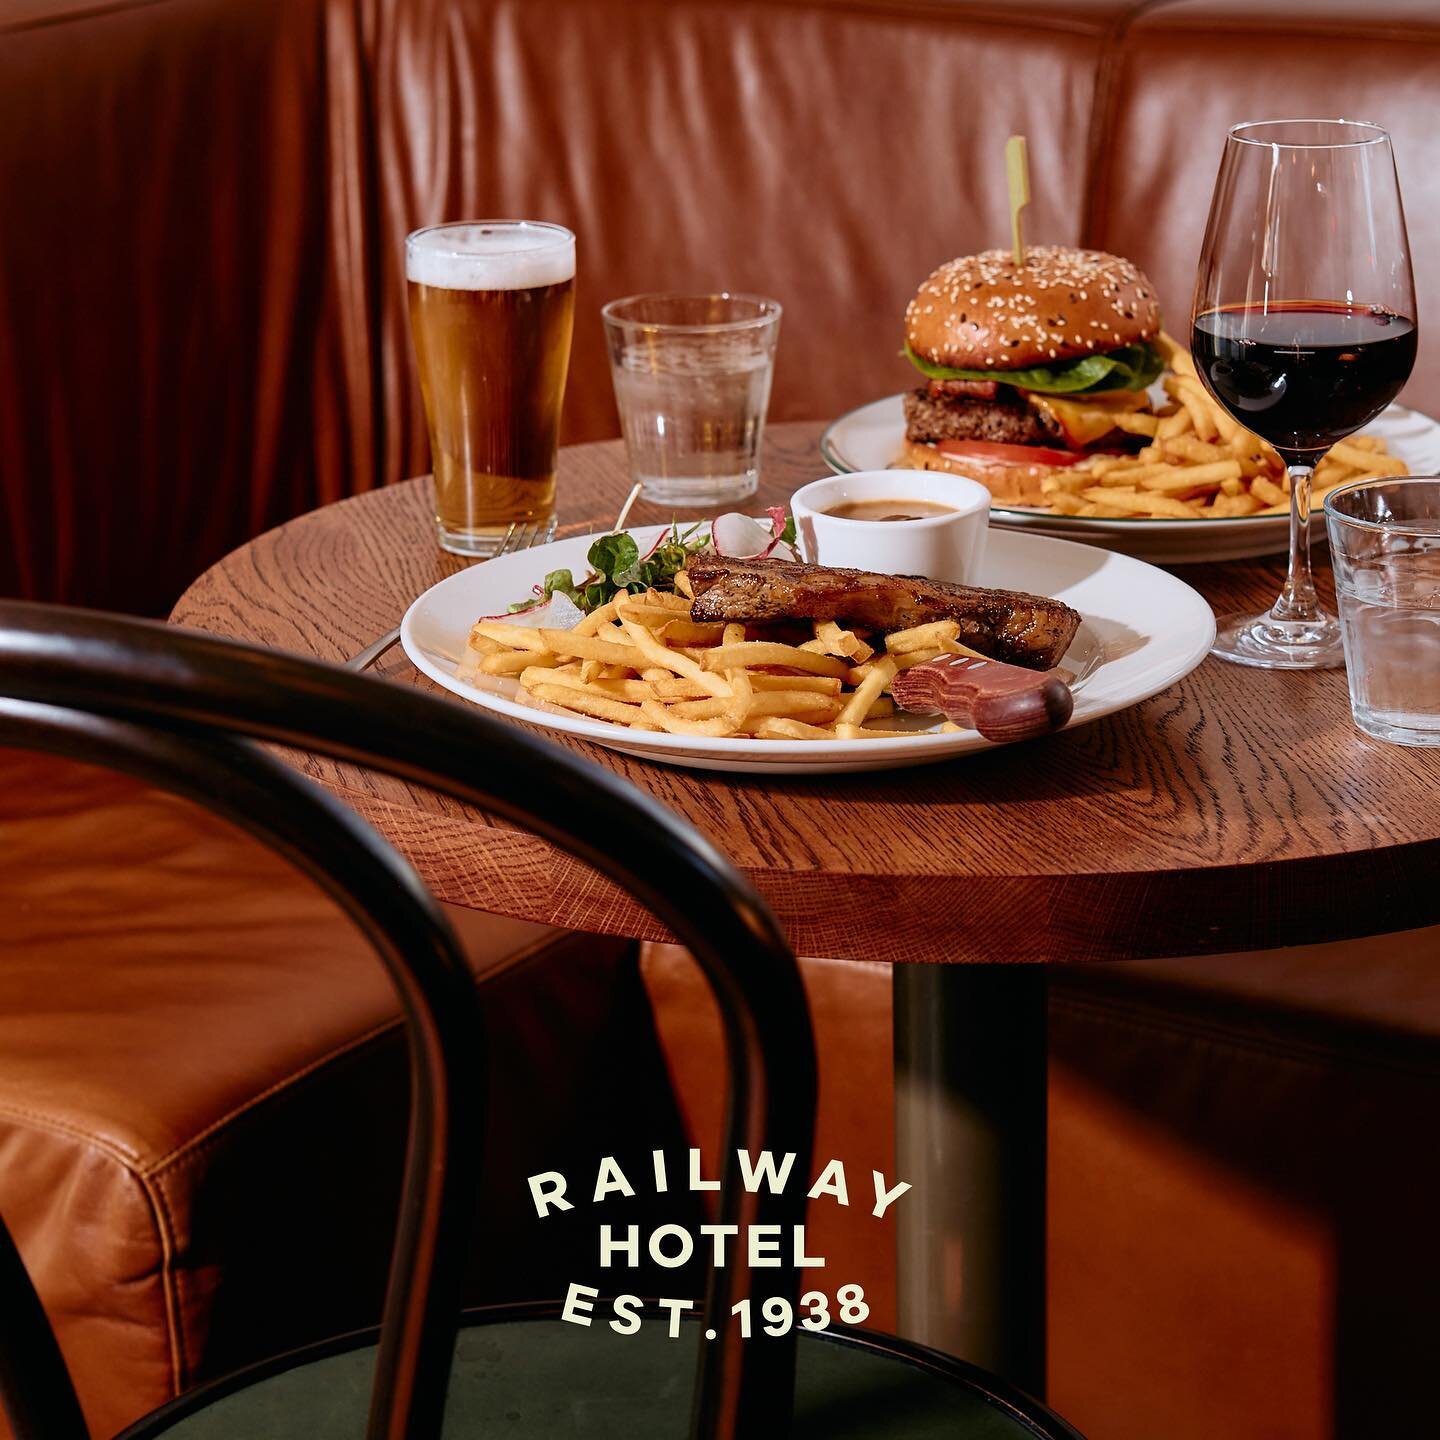 Treat your Dad this Father&rsquo;s Day and come celebrate with us.
 Reservations available throughout the whole pub.
Visit our website (link in bio) or call to book today 03 9687 2034

#railwayhotelyarraville #coldbeerservedhere #fathersday